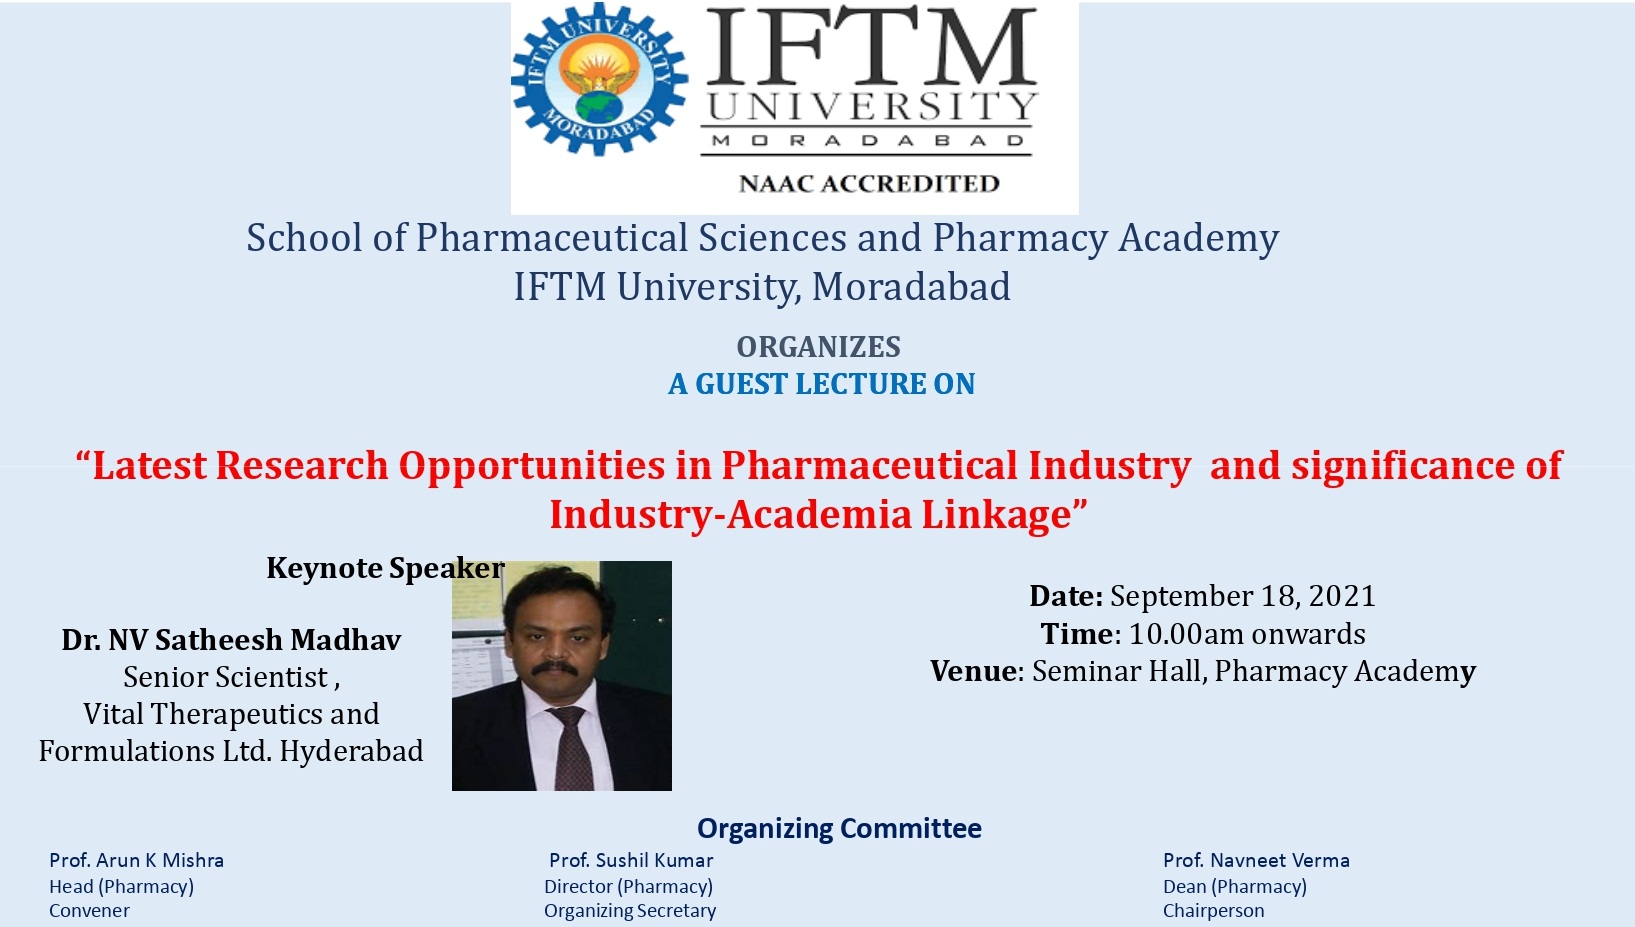 Guest Lecture on Latest Research Opportunities in Pharmaceutical Industry and significance of Industry-Academia Linkage